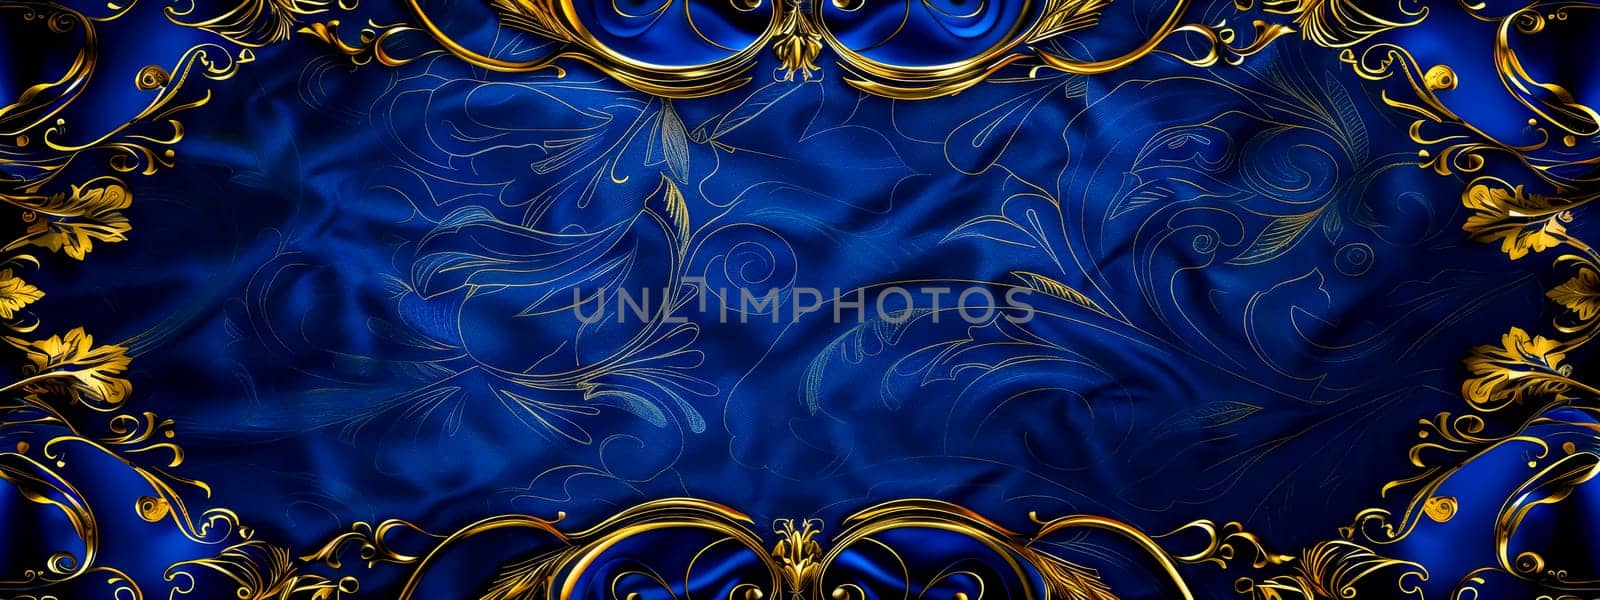 Elegant blue and gold floral pattern background by Edophoto